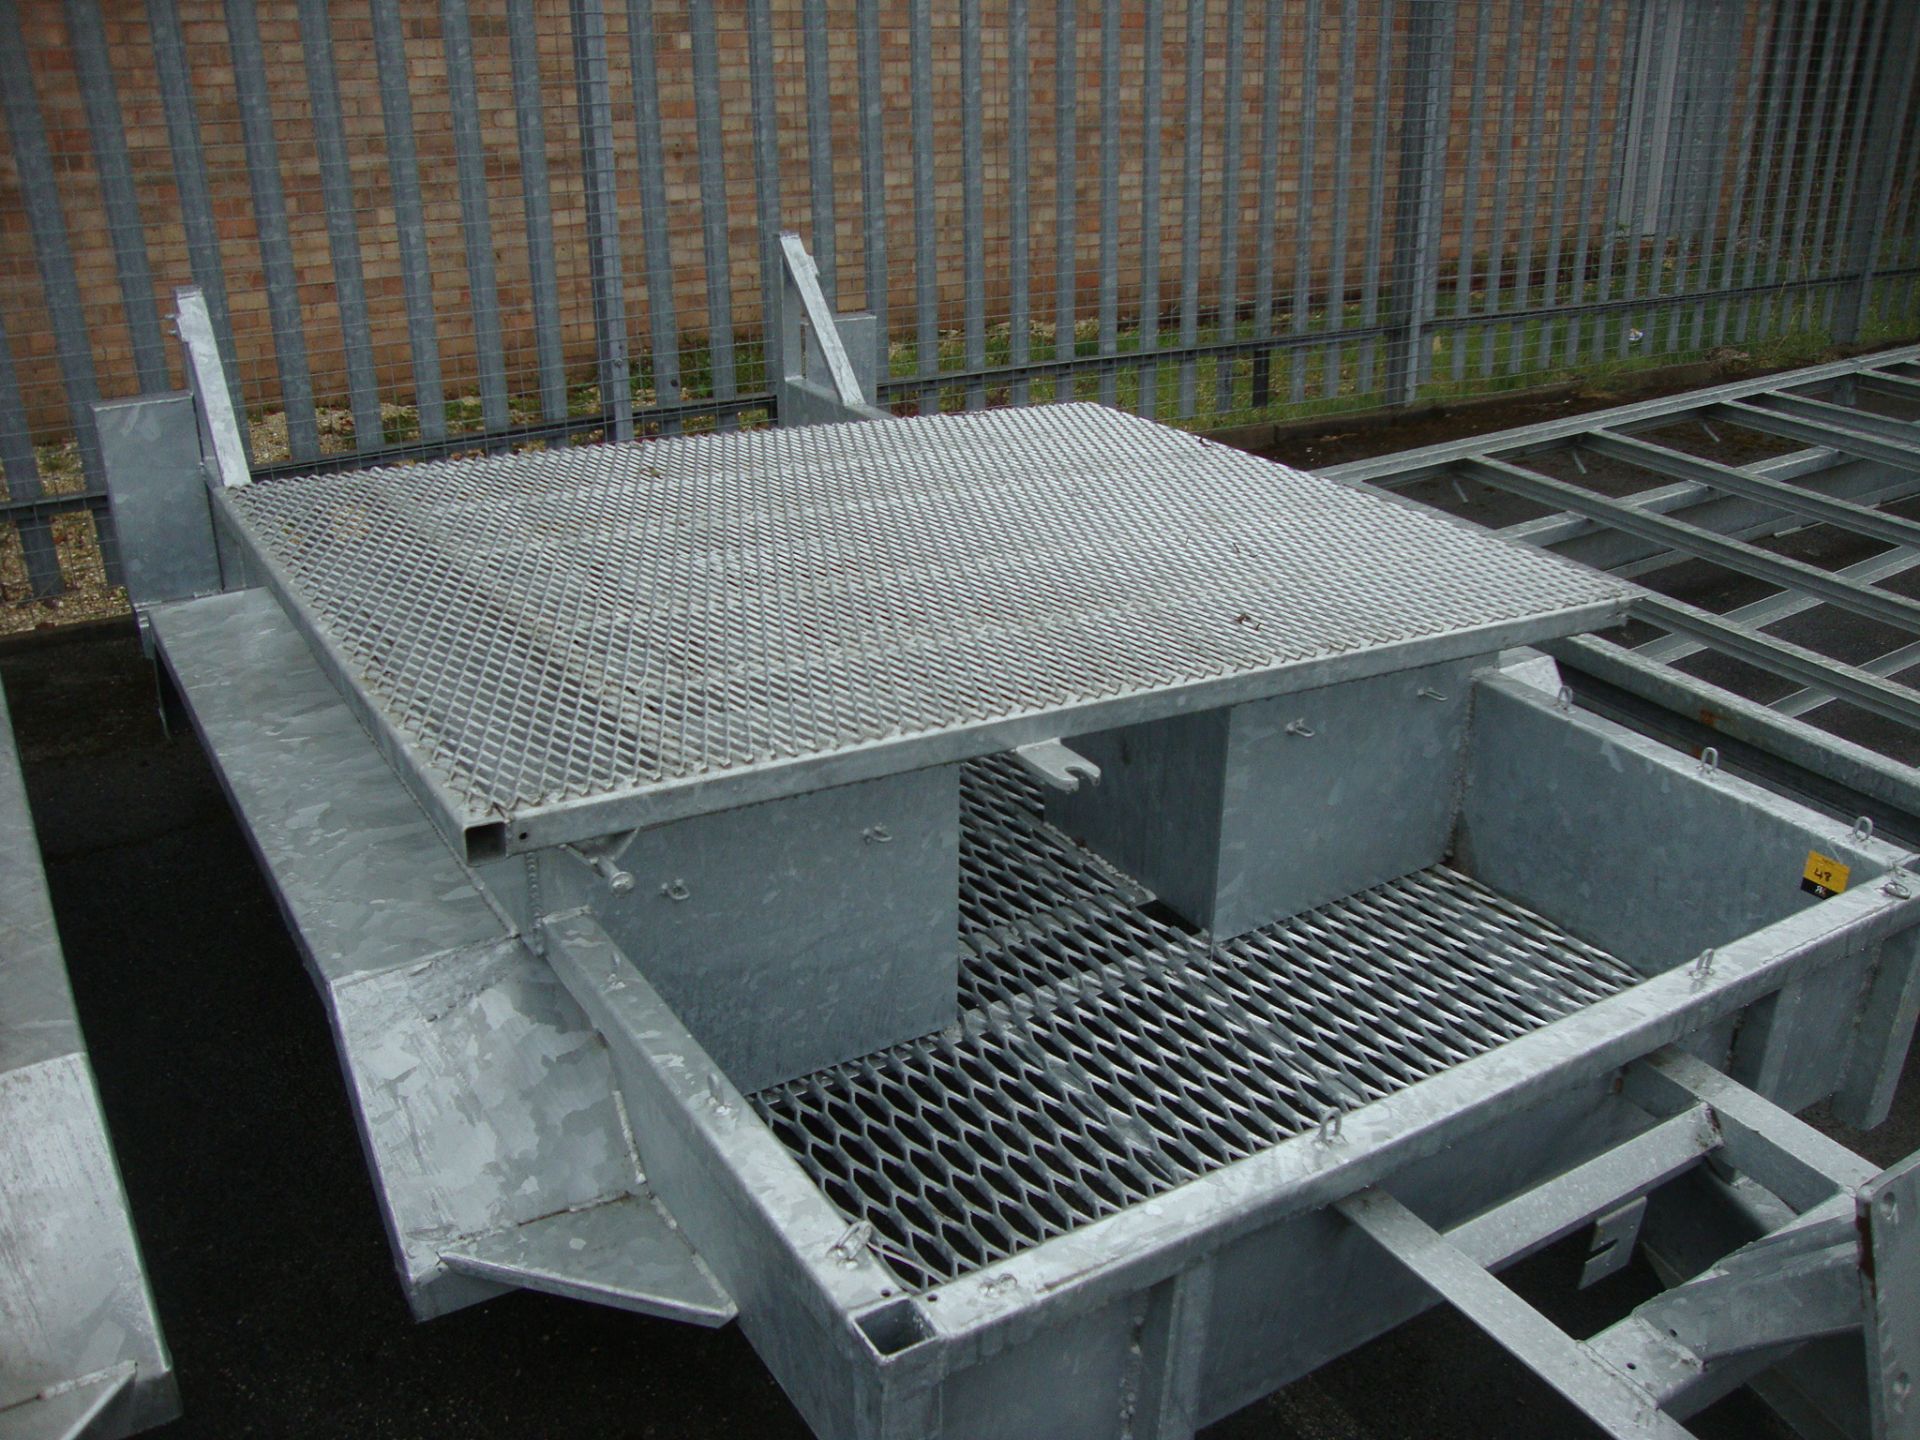 Mini digger/excavator trailer chassis, in galvanised steel, incorporating shrouds for driving the - Image 3 of 4